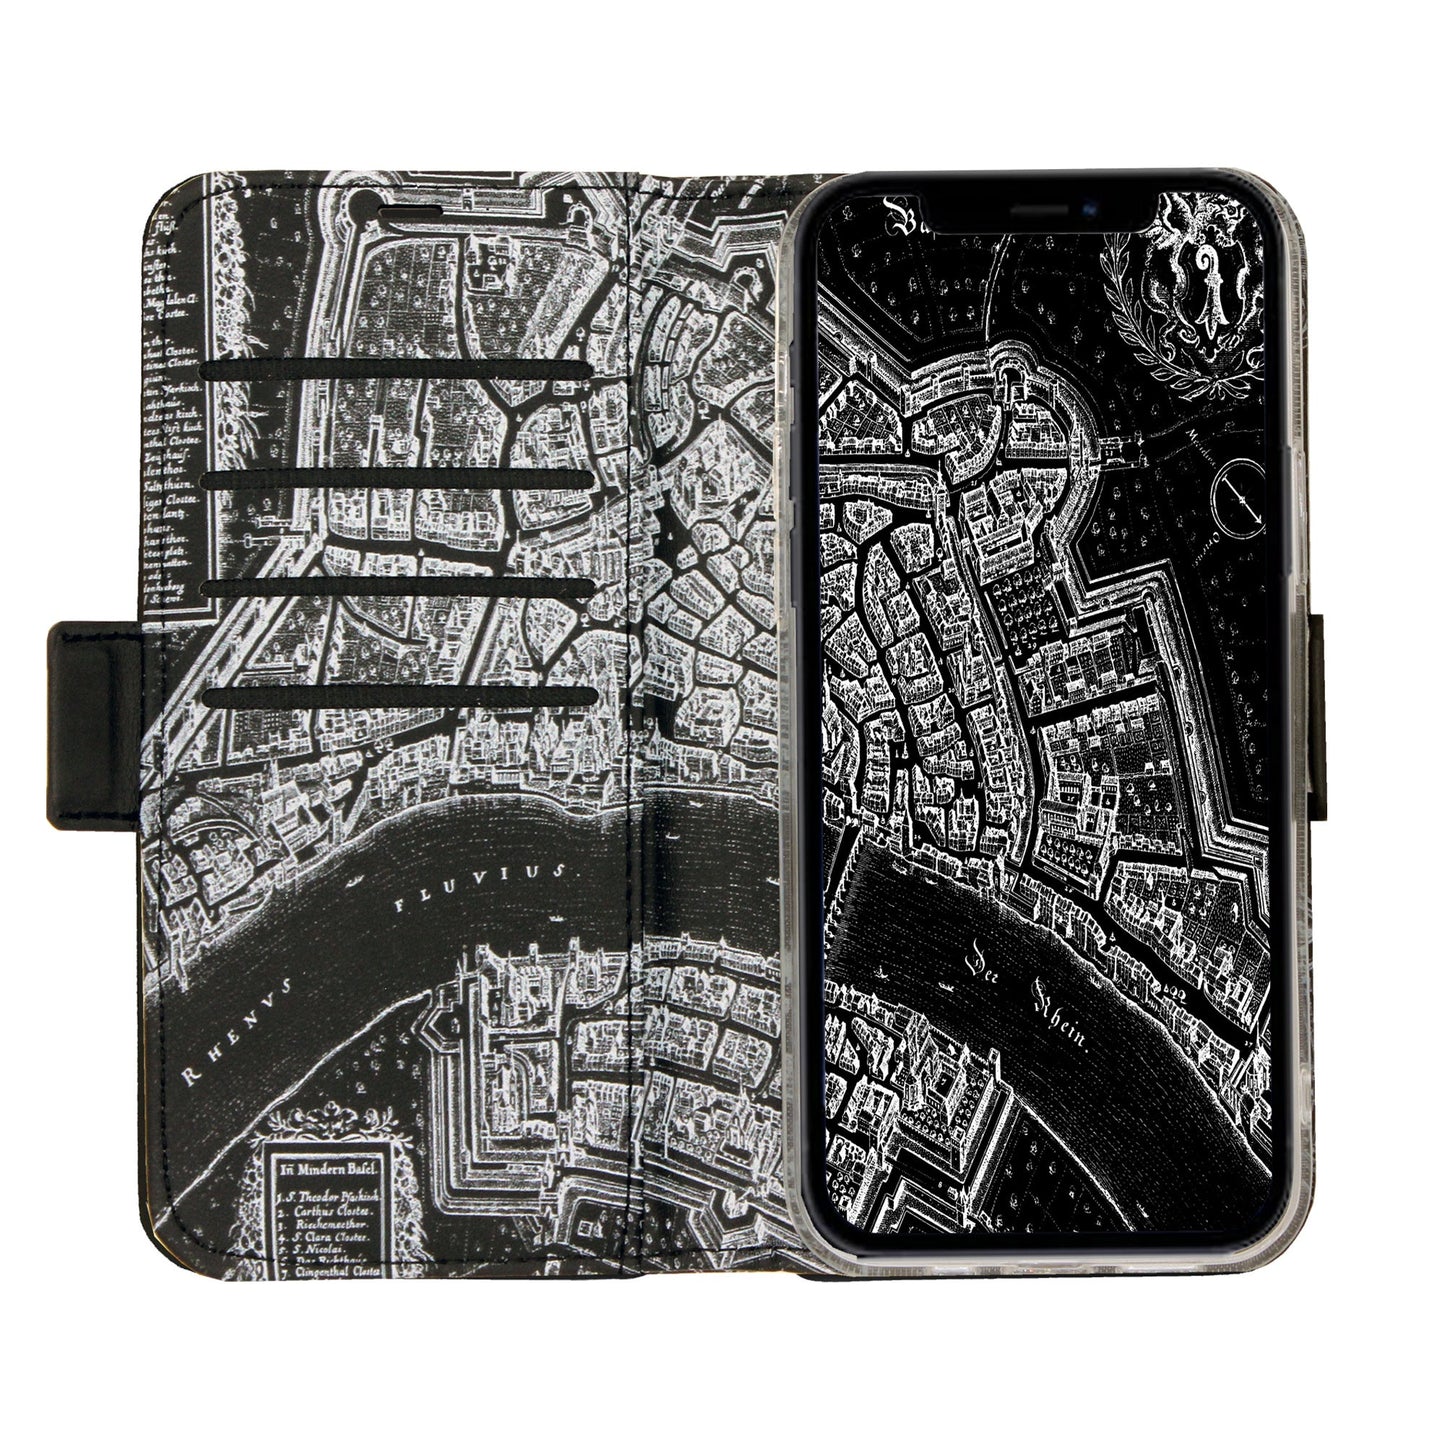 Basel Merian Negative Victor Case for iPhone 12/12 Pro